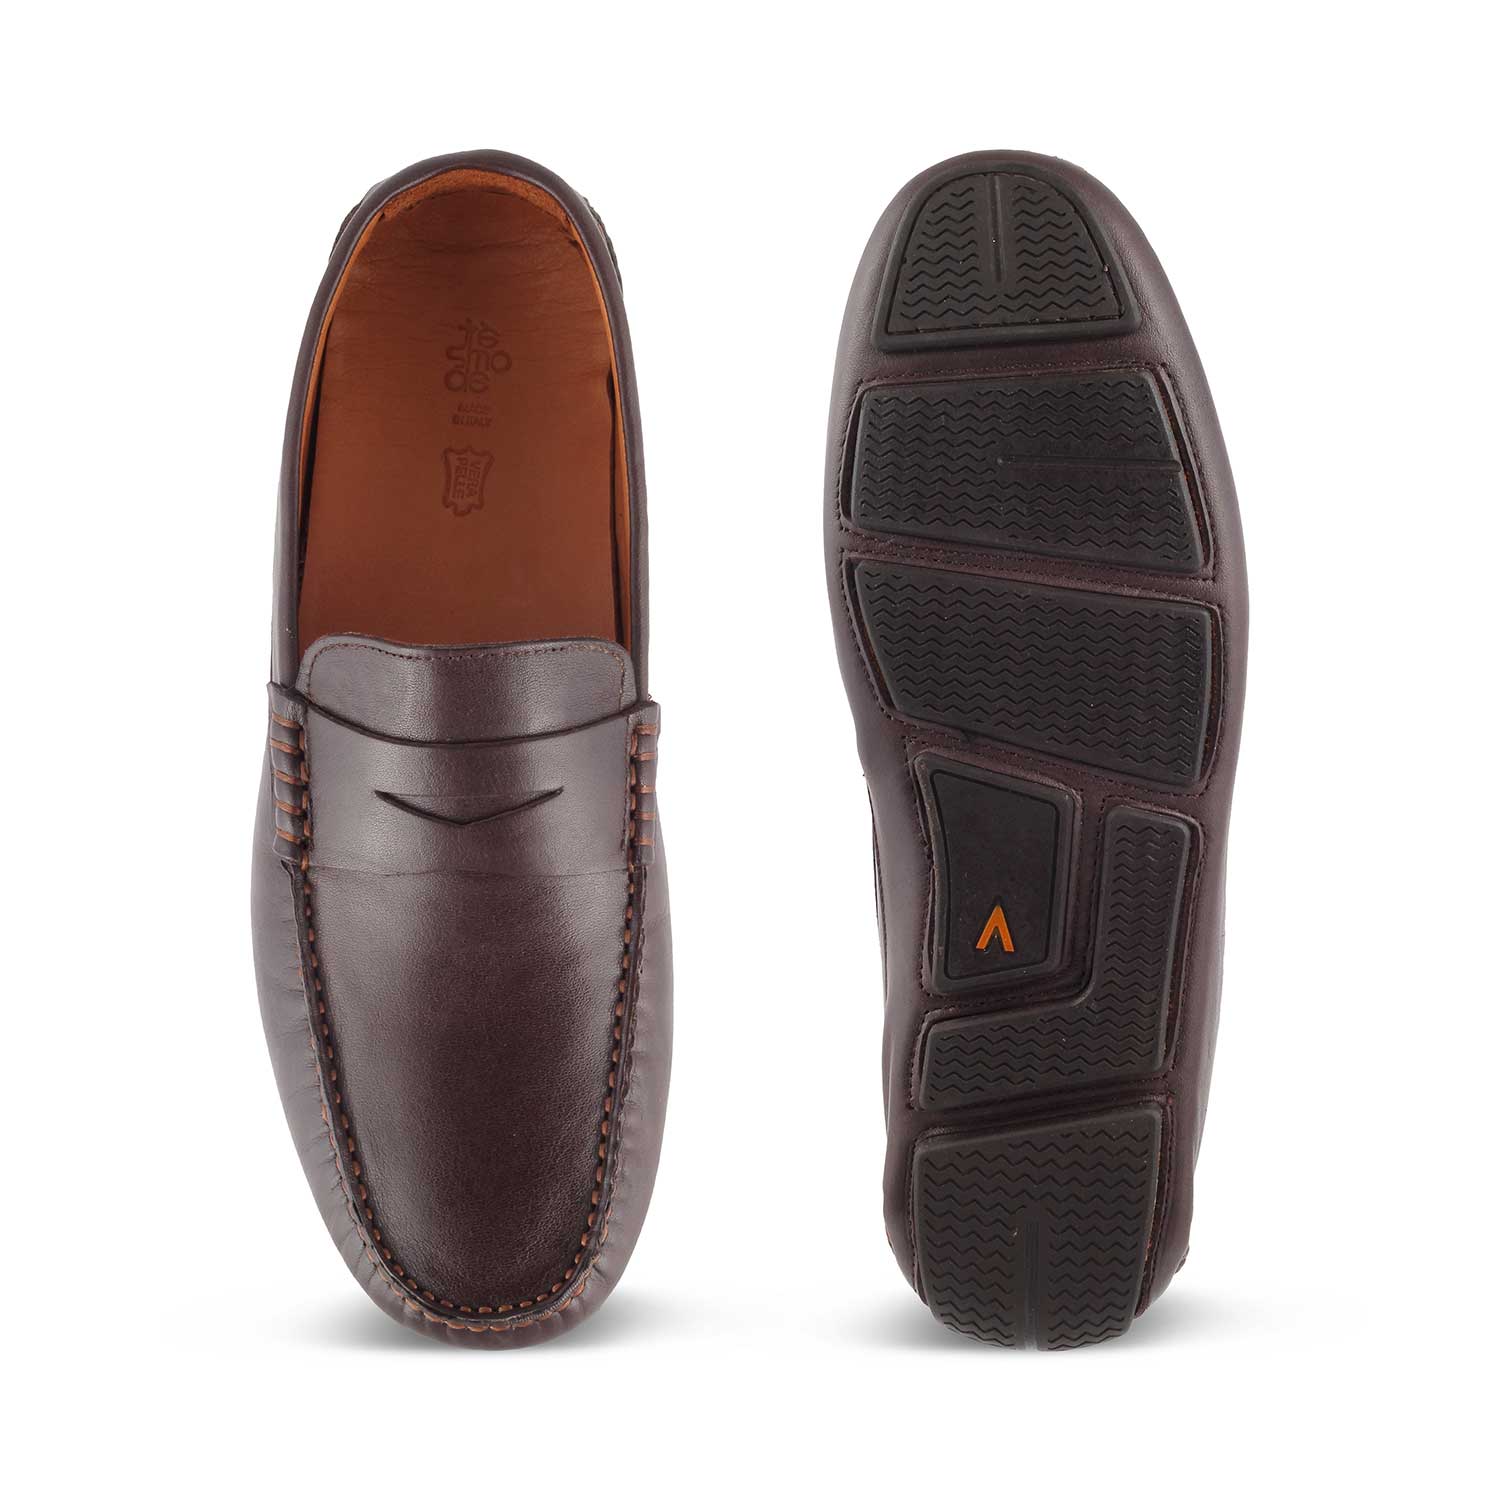 Tresmode-The Porta Brown Men's Leather Driving Loafers Tresmode-Tresmode